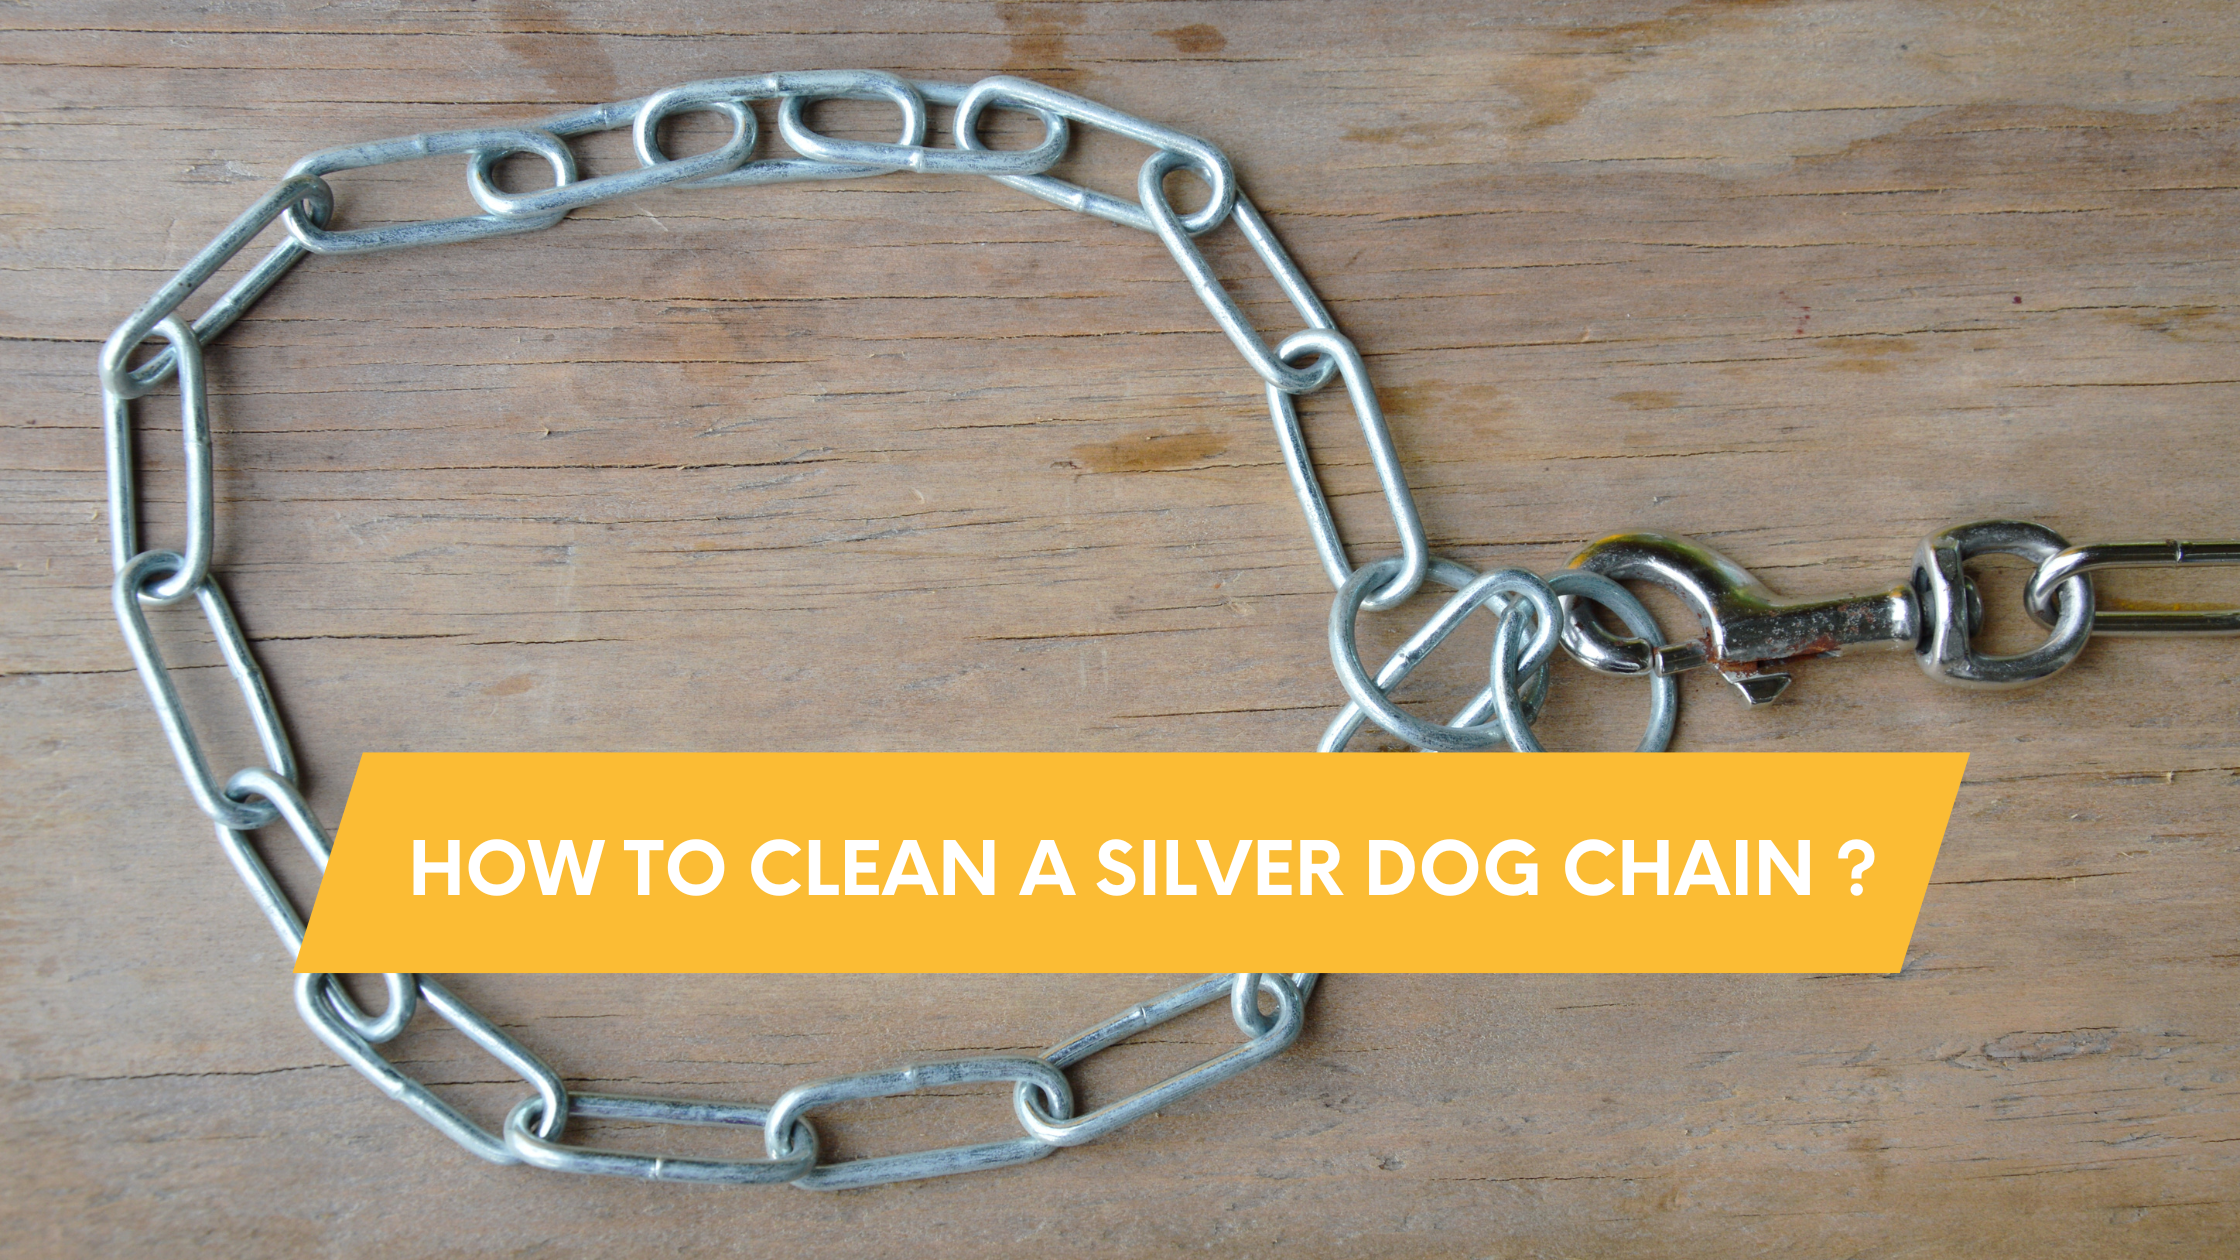 How to clean a silver dog chain